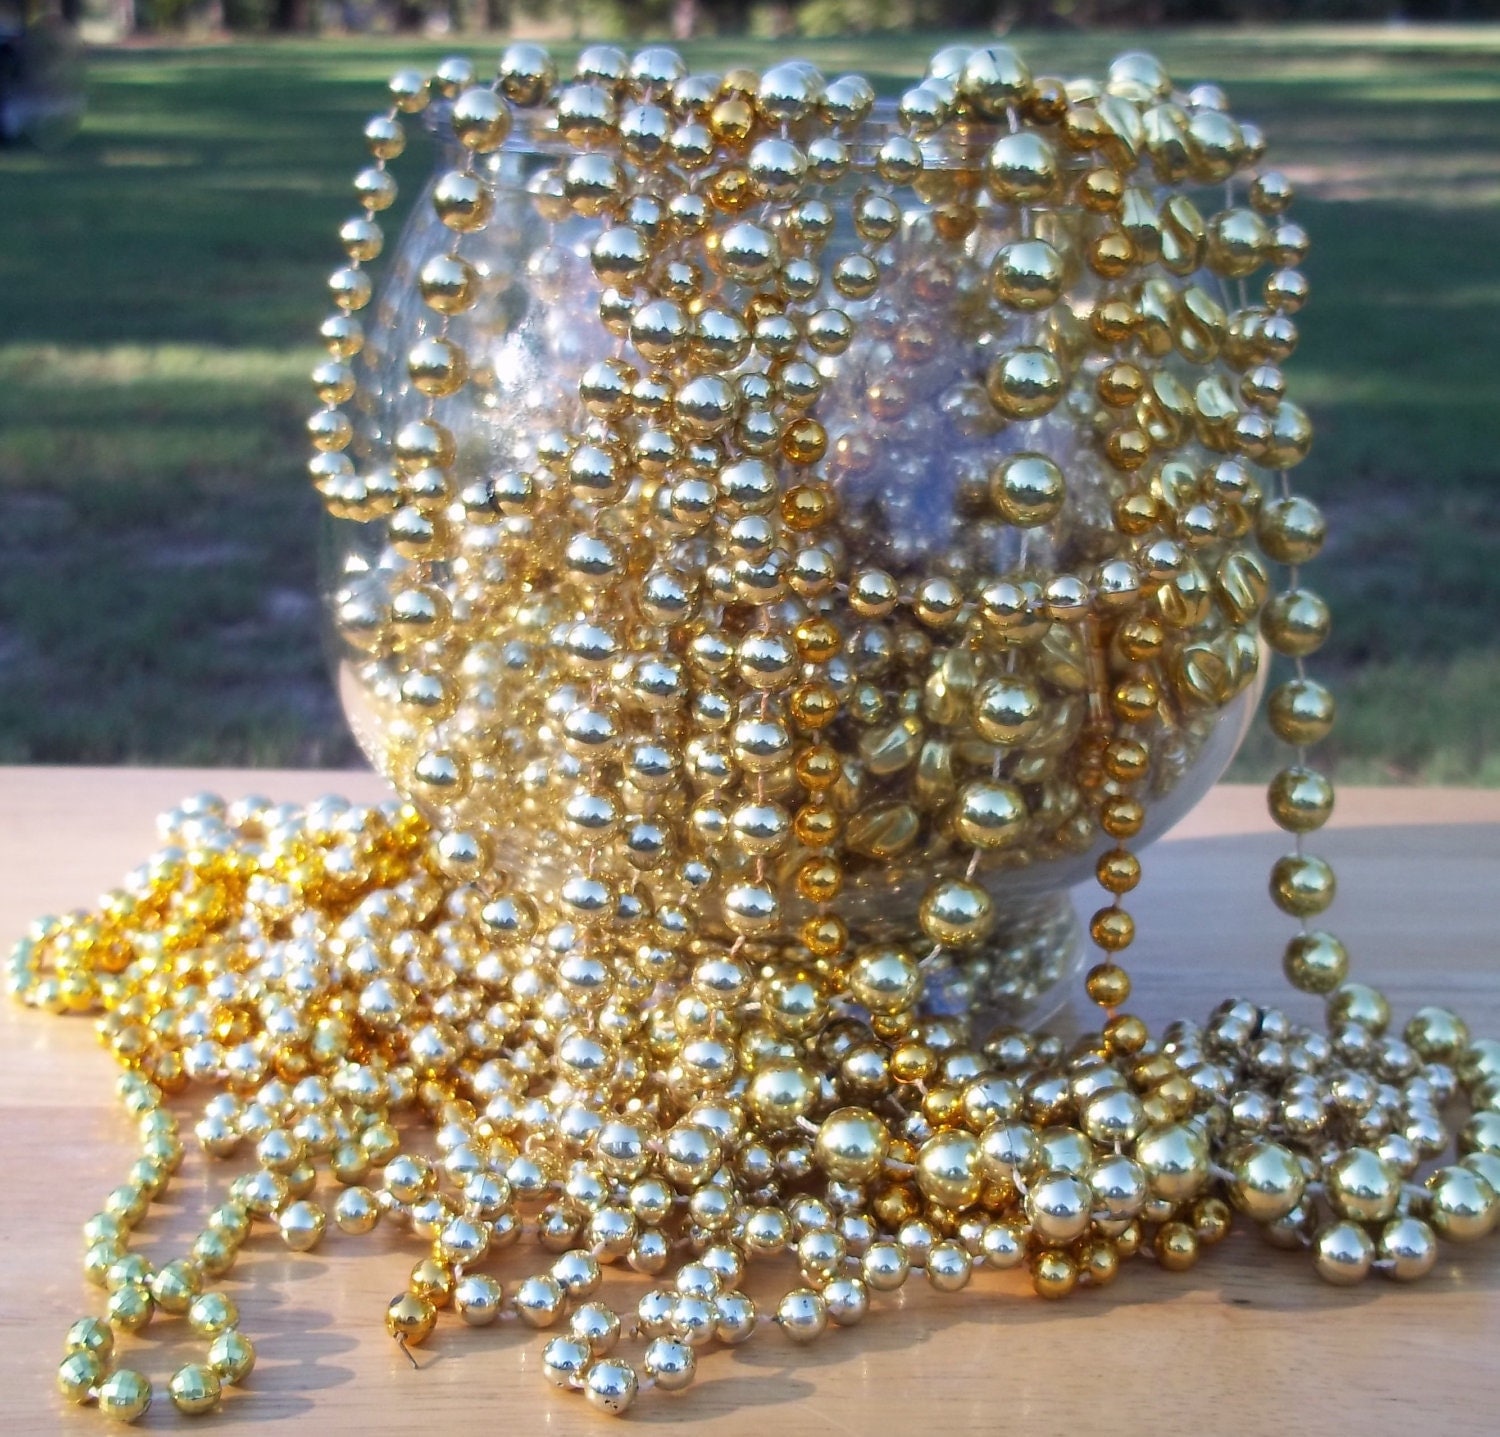 Gold Mardi Gras Parade Beads Huge over 2 1/2 lb by GoneToTexas